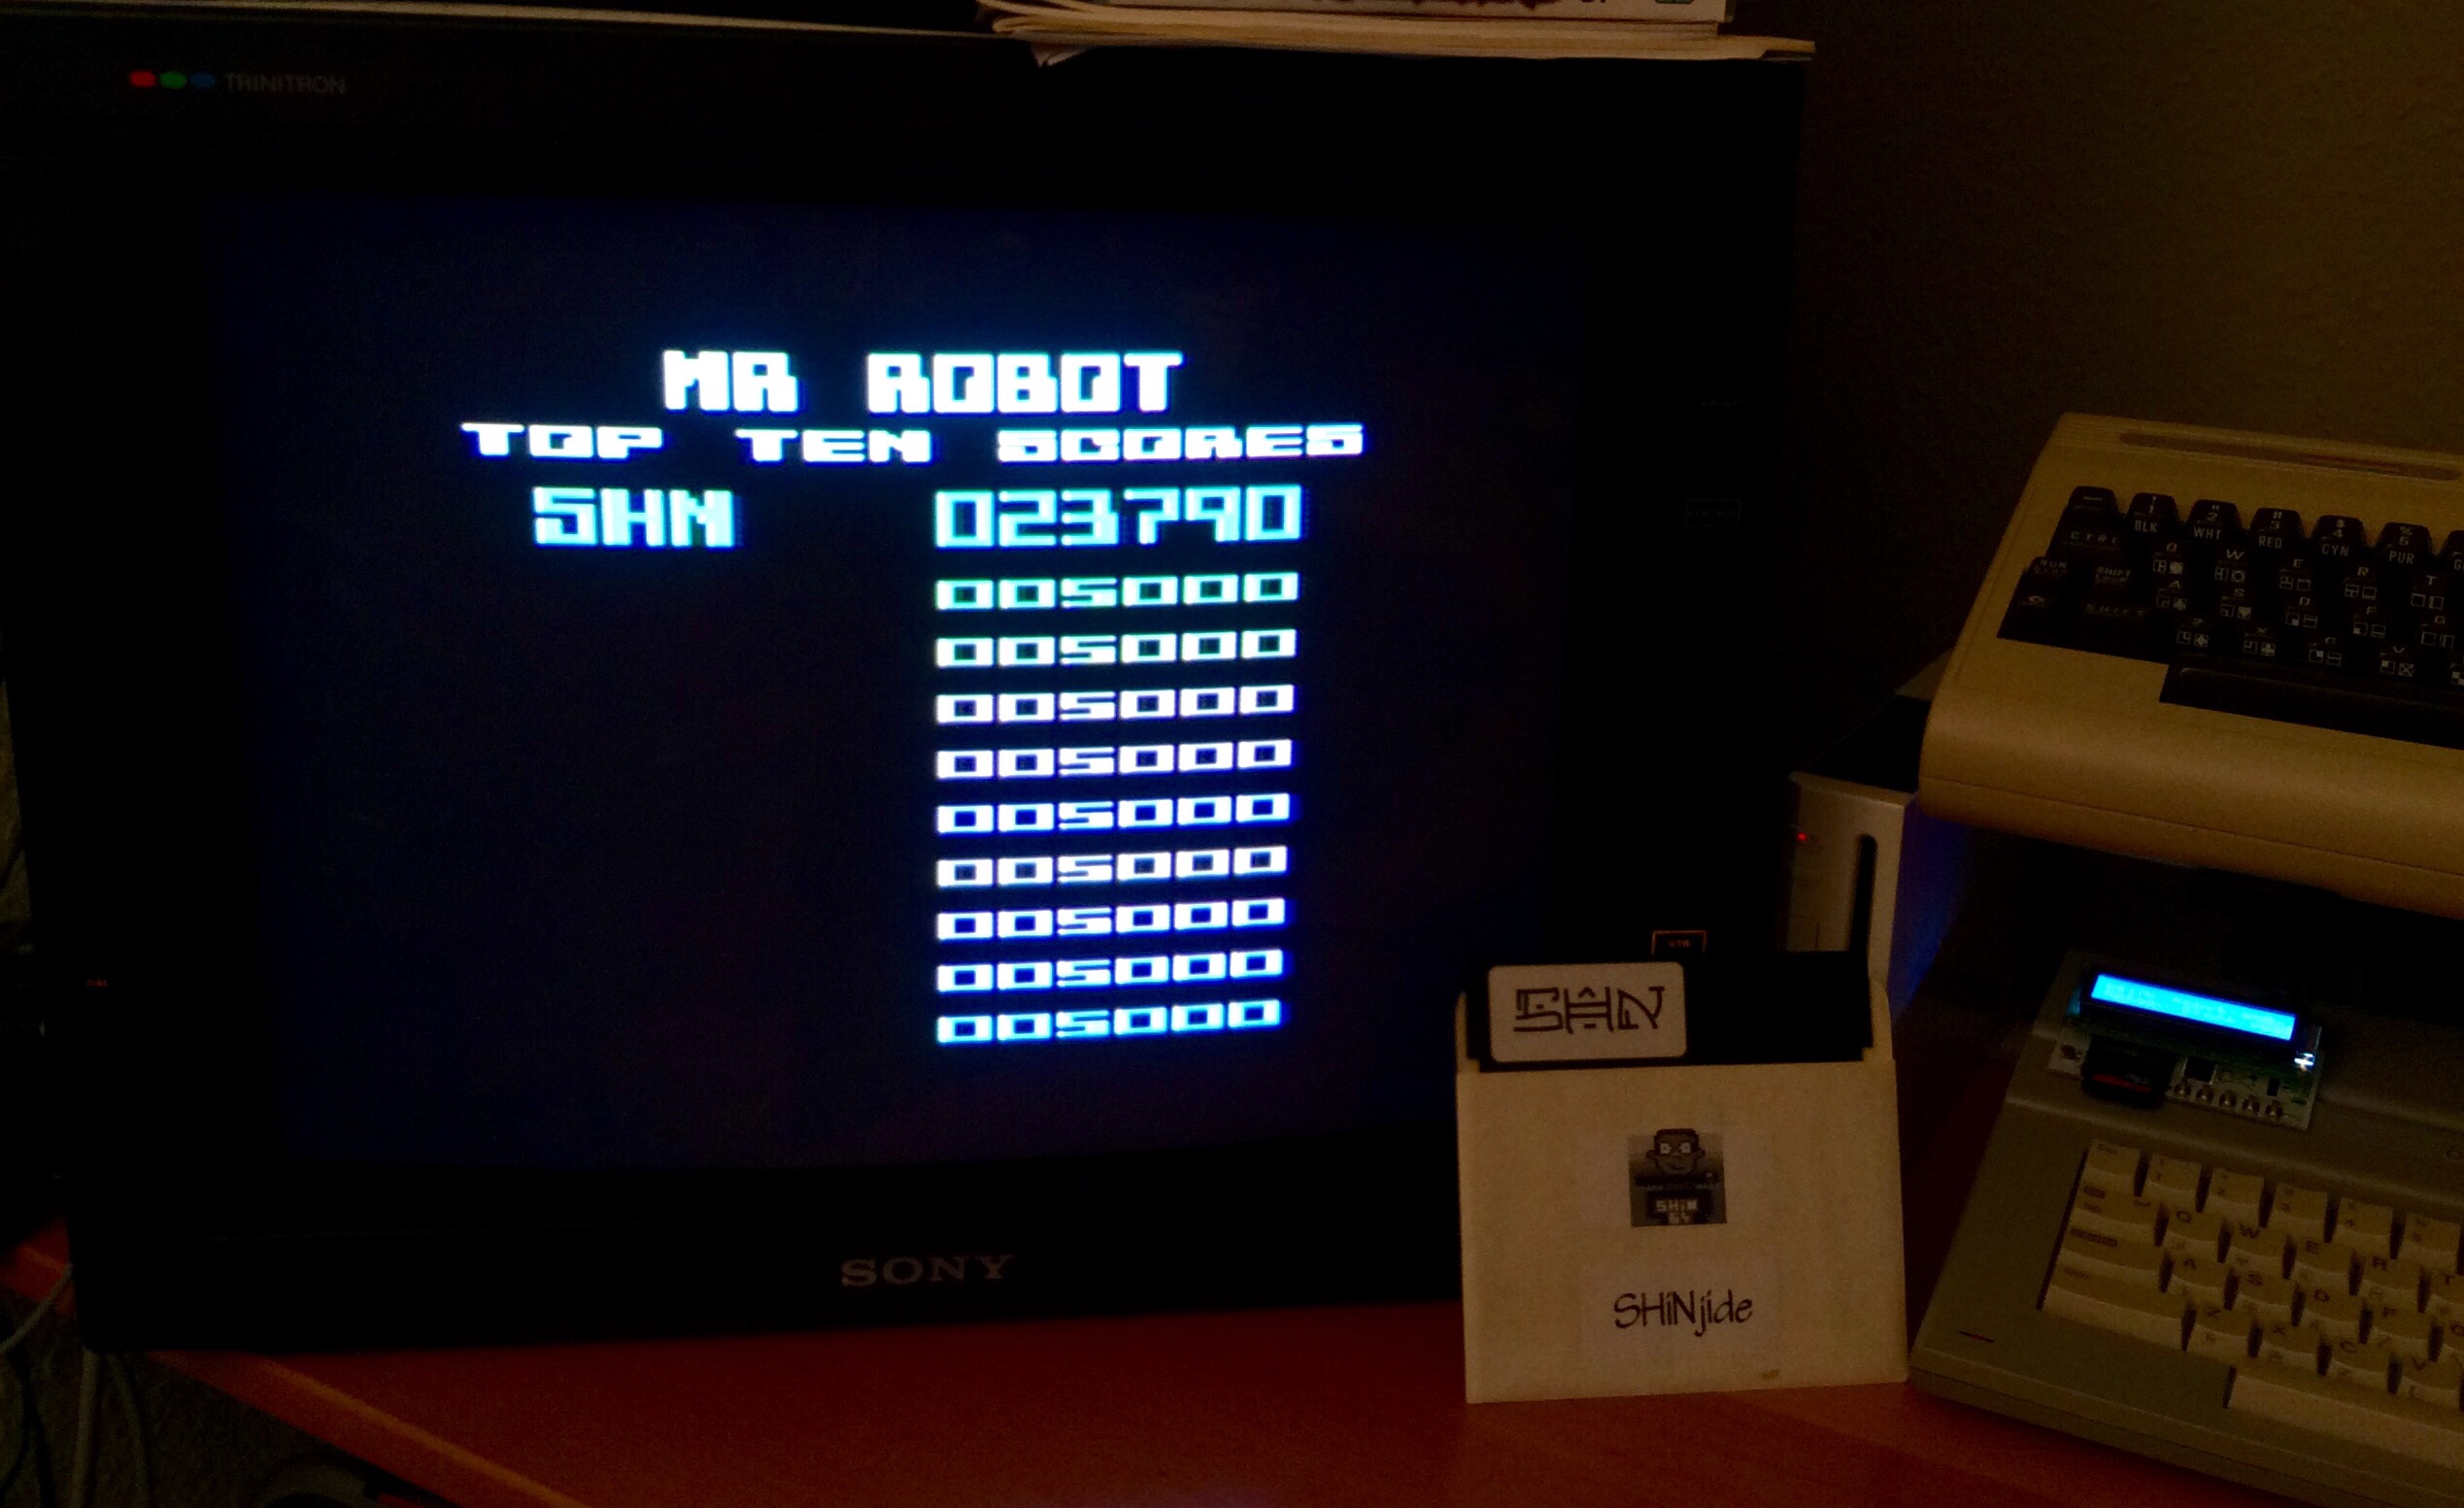 SHiNjide: Mr. Robot and His Robot Factory (Atari 400/800/XL/XE) 23,790 points on 2015-01-28 12:01:35